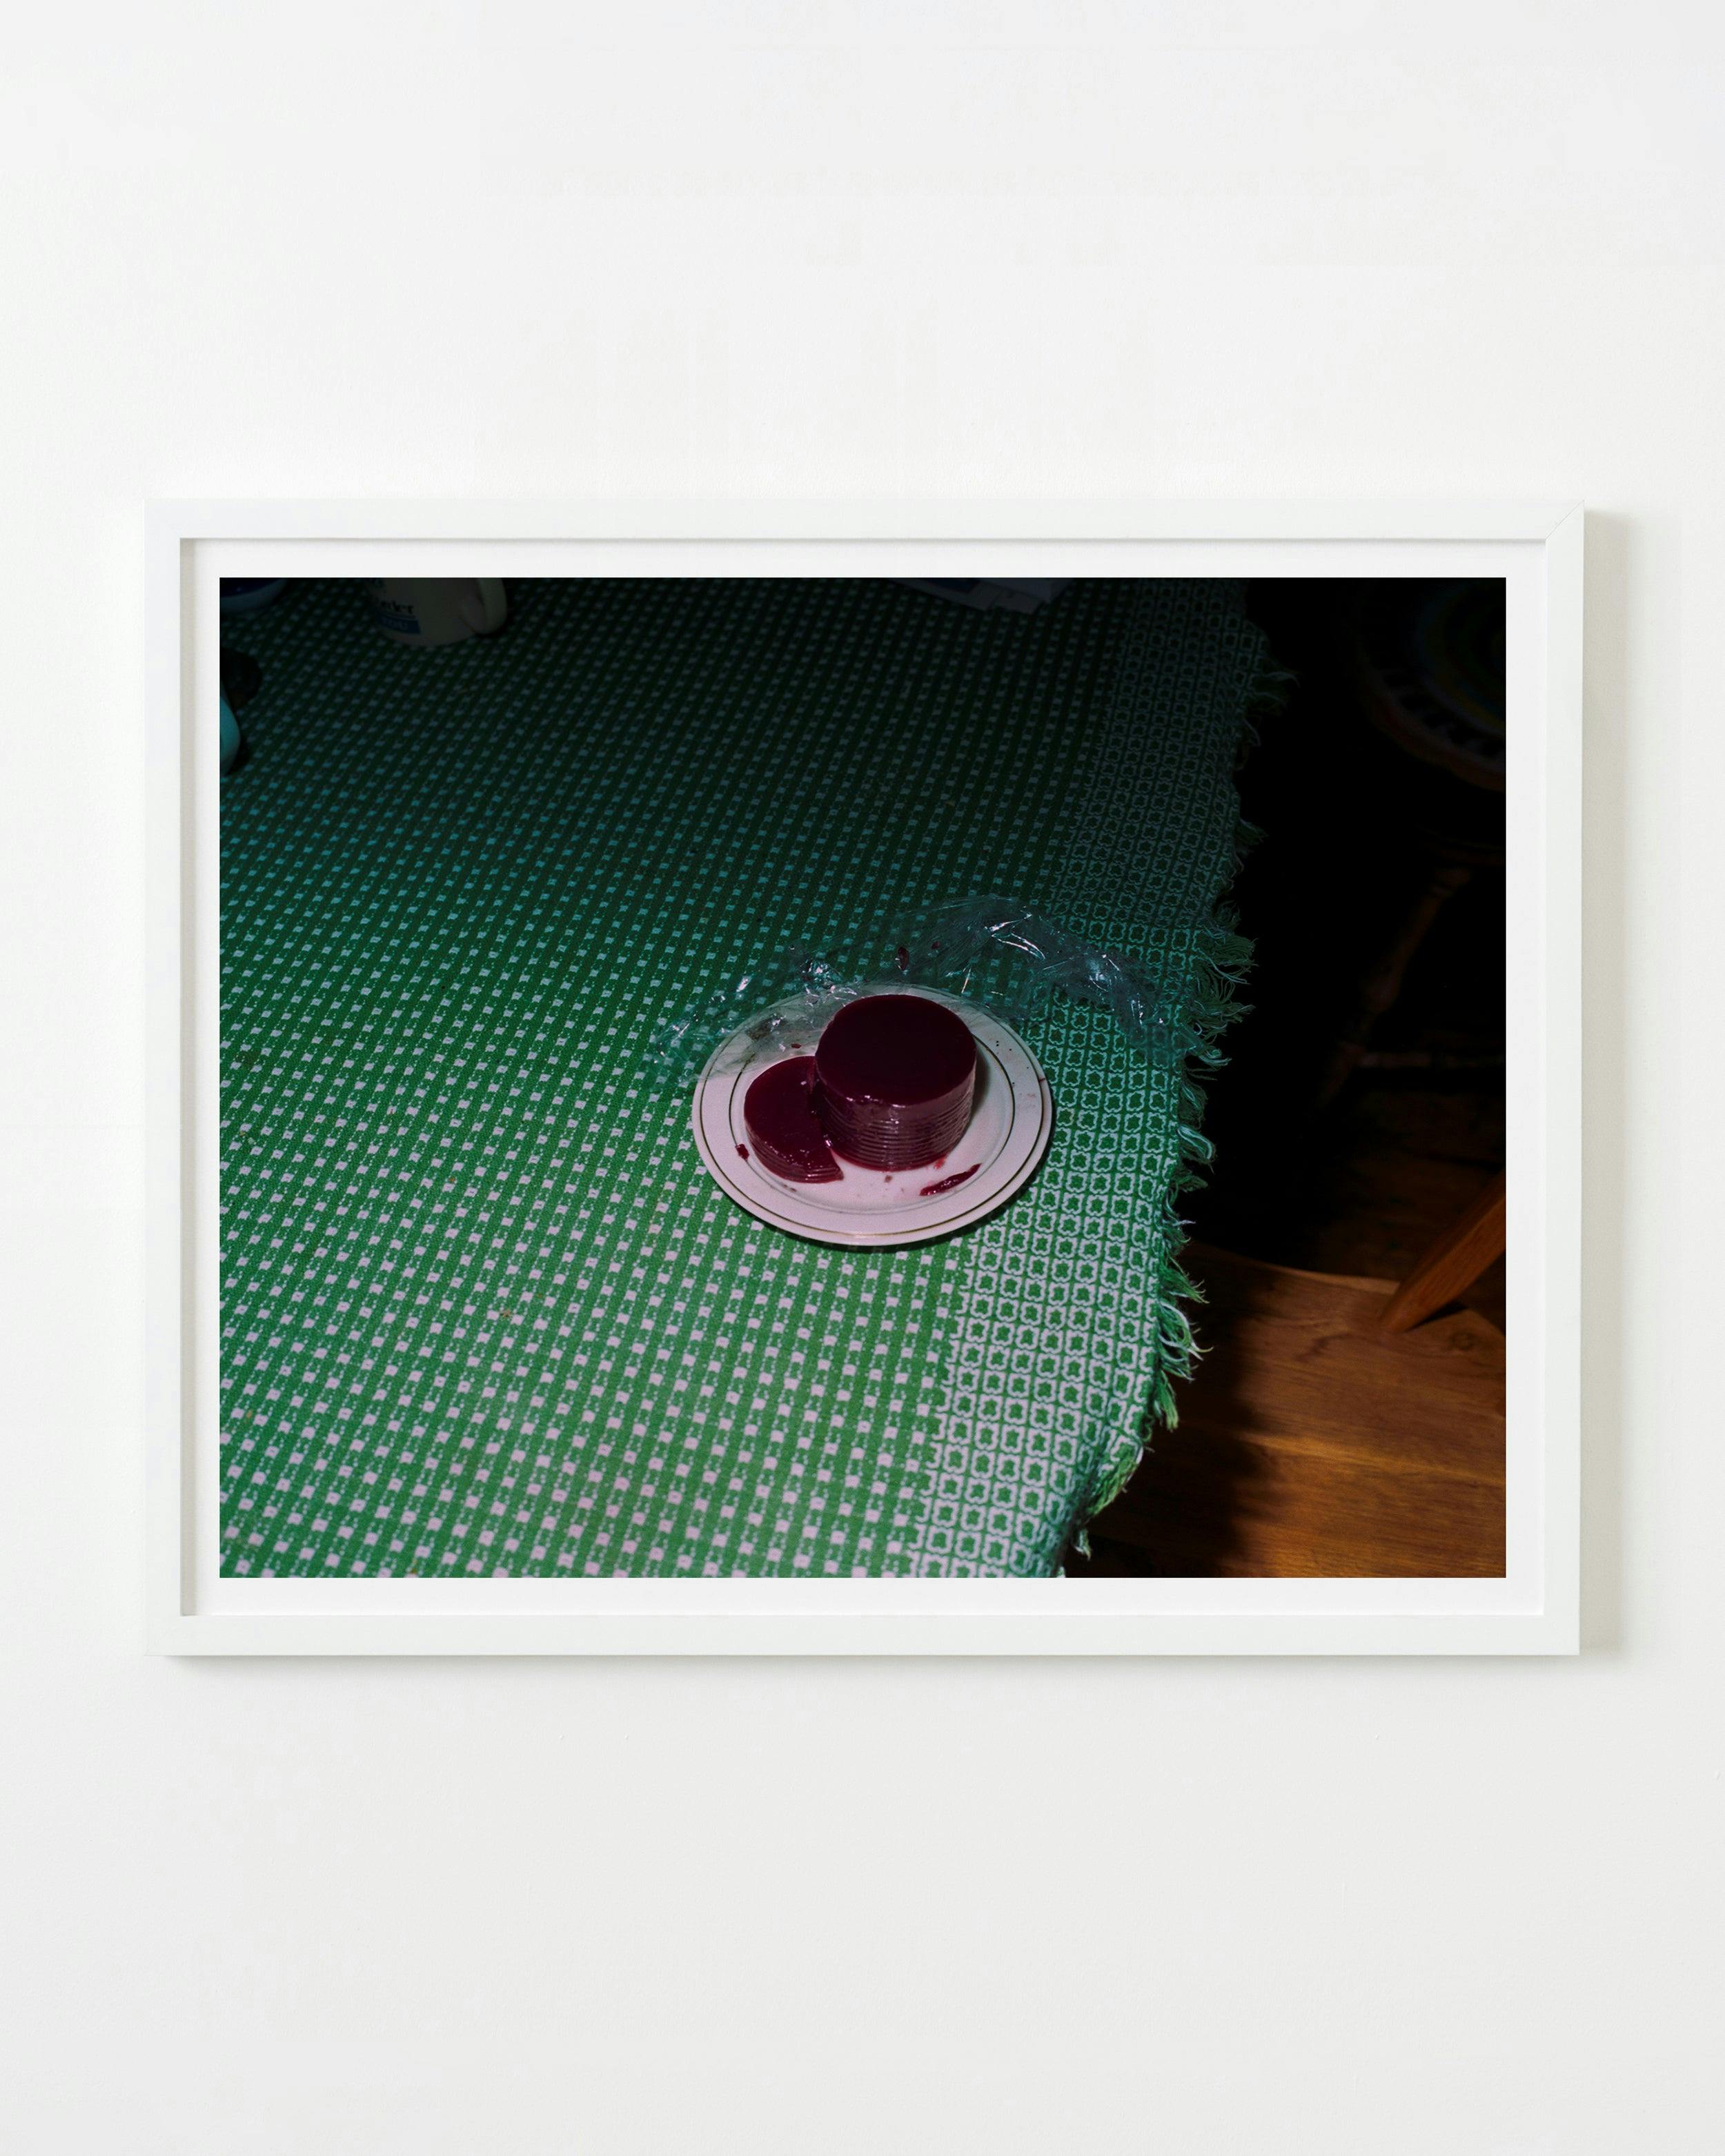 Photography by Nick Meyer titled "Cranberry Jelly, Conway".